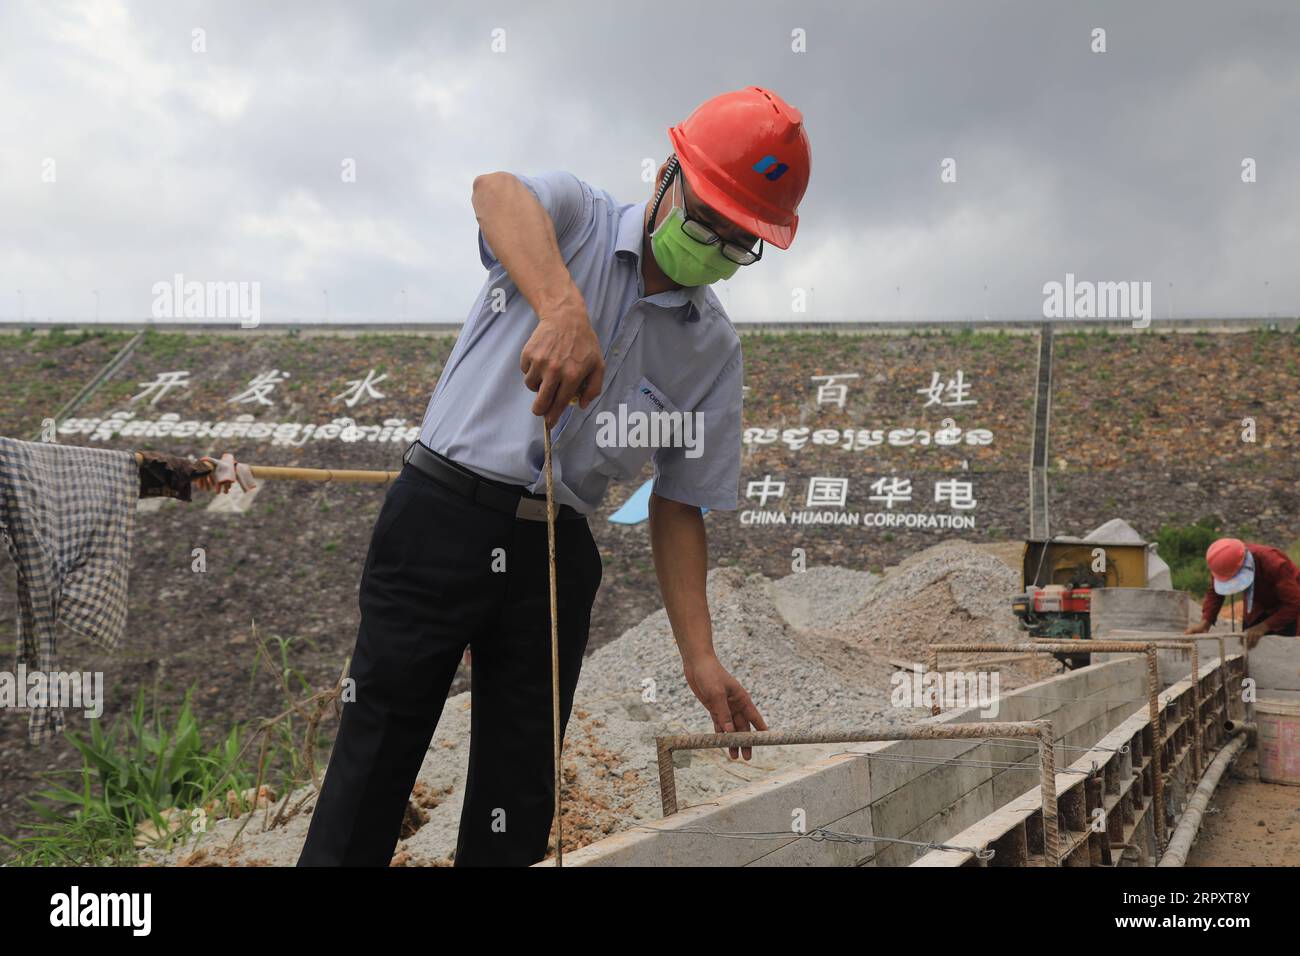 200602 -- BEIJING, June 2, 2020 Xinhua -- Luo Jianhua, deputy director of the production technology department of the Chinese-built lower Stung Russei Chrum hydropower plant, works at a dam in Cambodia s southwestern Koh Kong province, May 23, 2020. TO GO WITH XINHUA HEADLINES OF JUNE 2, 2020 China Huadian Lower Stung Russei Chrum Hydroelectric Project Cambodia Company Limited/Handout via Xinhua CHINA-BELT AND ROAD-PROJECTS-COVID-19 PUBLICATIONxNOTxINxCHN Stock Photo